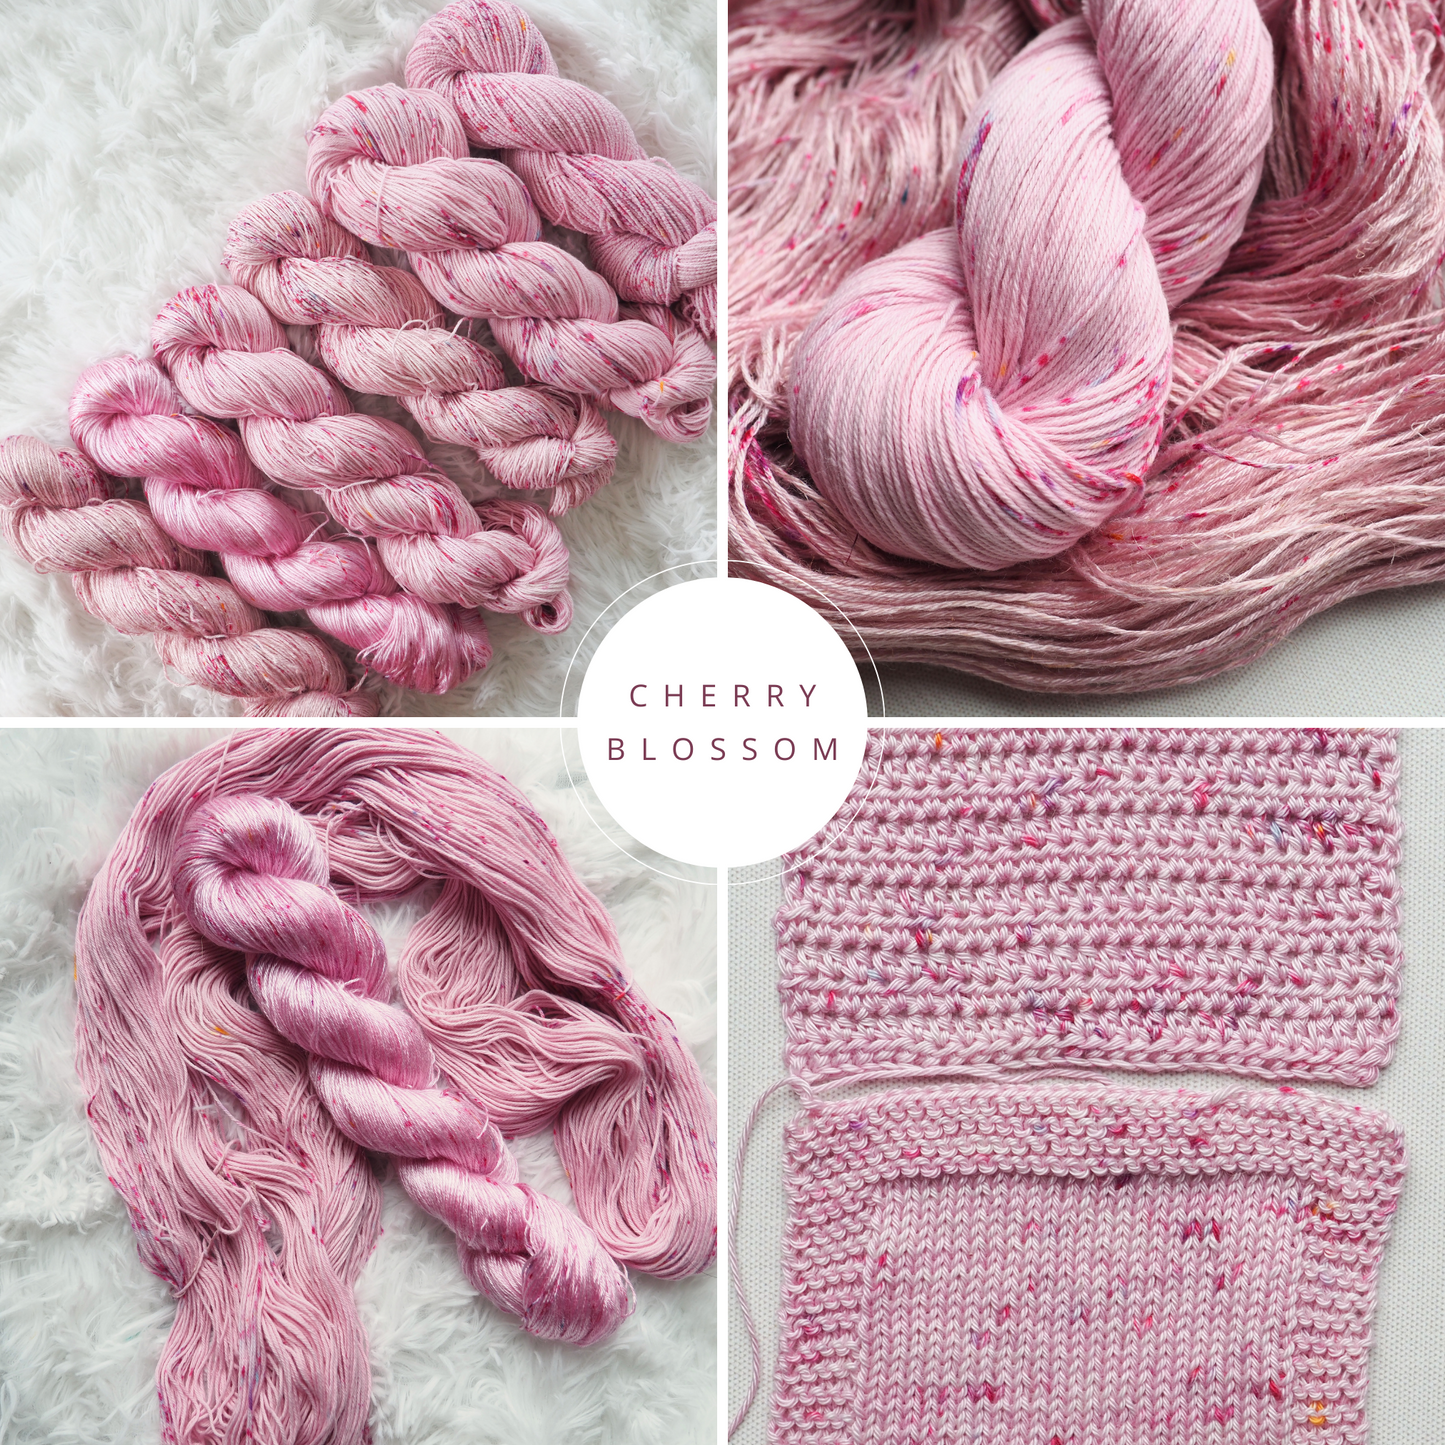 Cherry Blossom - Dyed to Order *Please allow 3-4 weeks for dyeing*